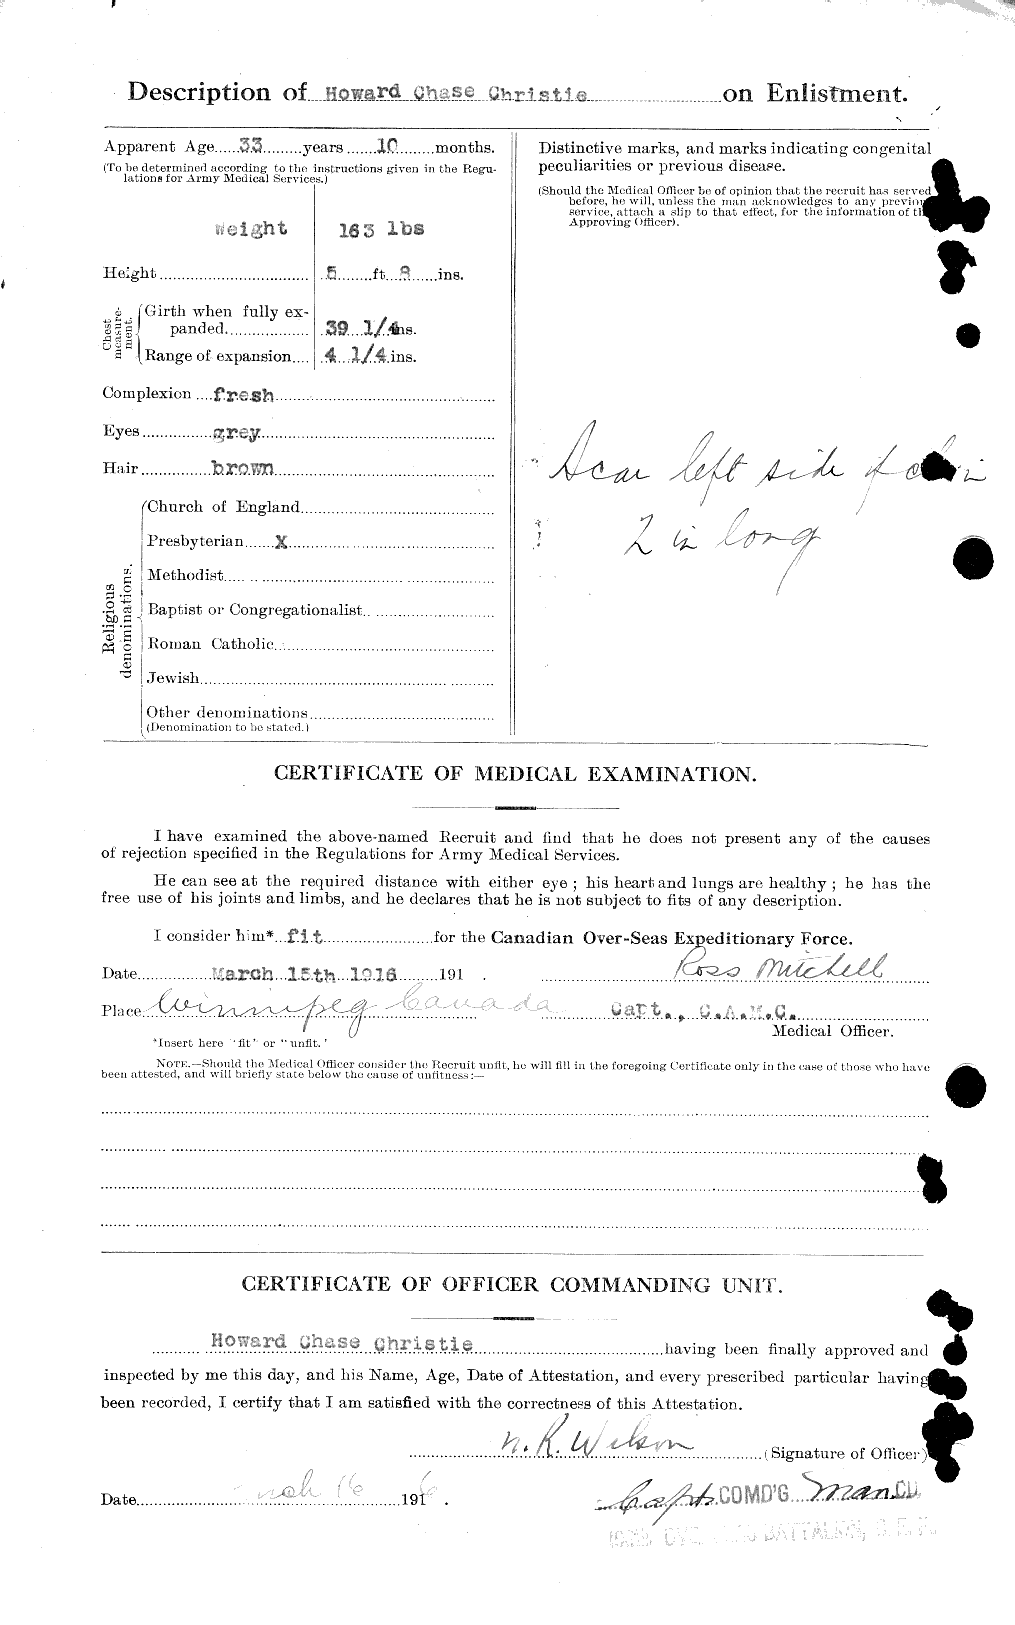 Personnel Records of the First World War - CEF 021966b